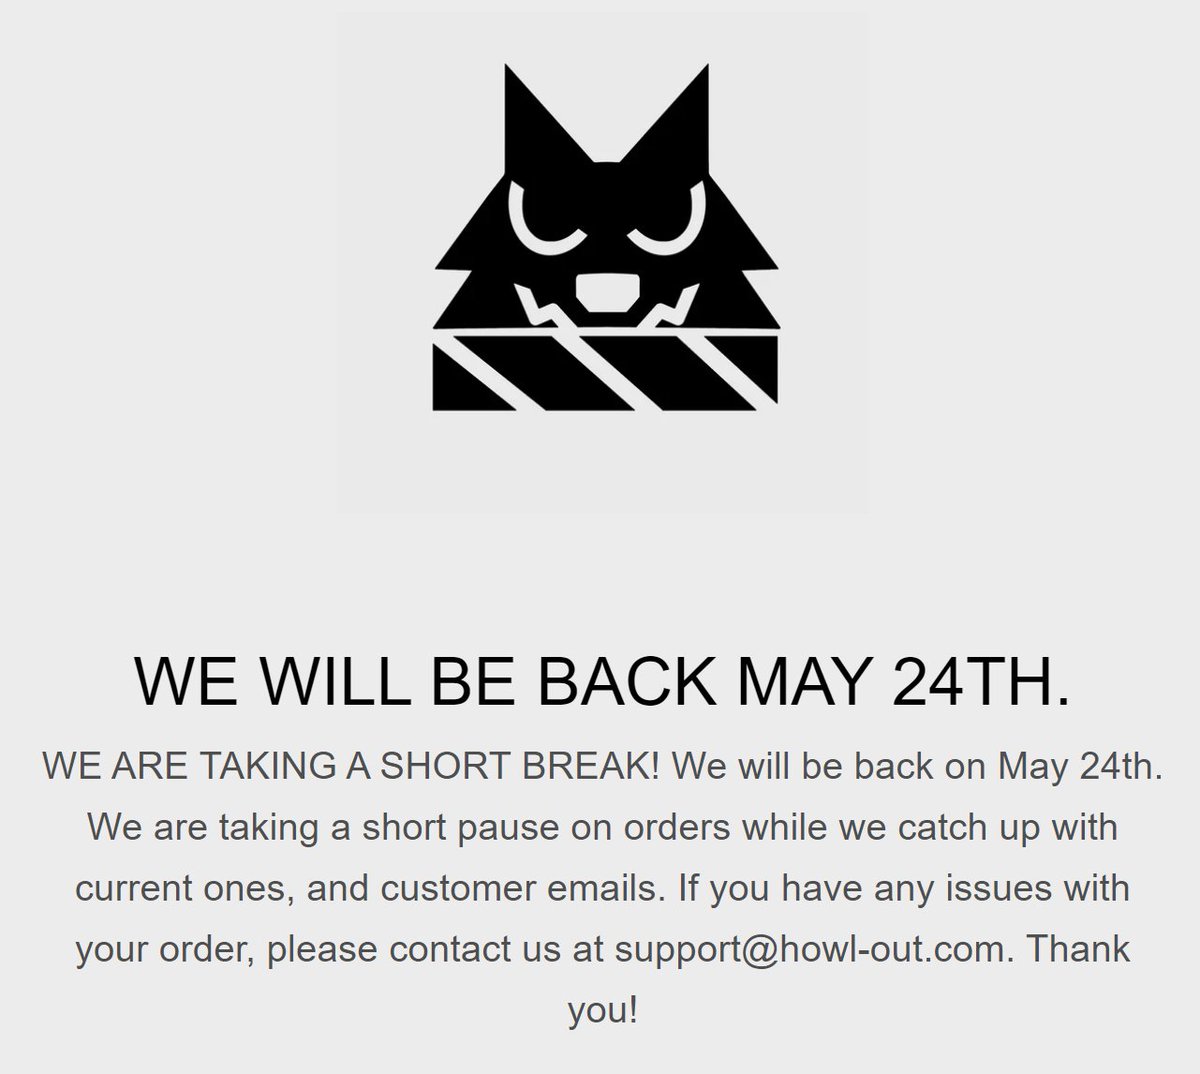 📢 WE ARE TAKING A SHORT BREAK! We will be back on May 24th. We are taking a short pause on orders while we catch up with current ones, and customer emails. If you have any issues with your order, please contact us at support@howl-out.com. Thank you!